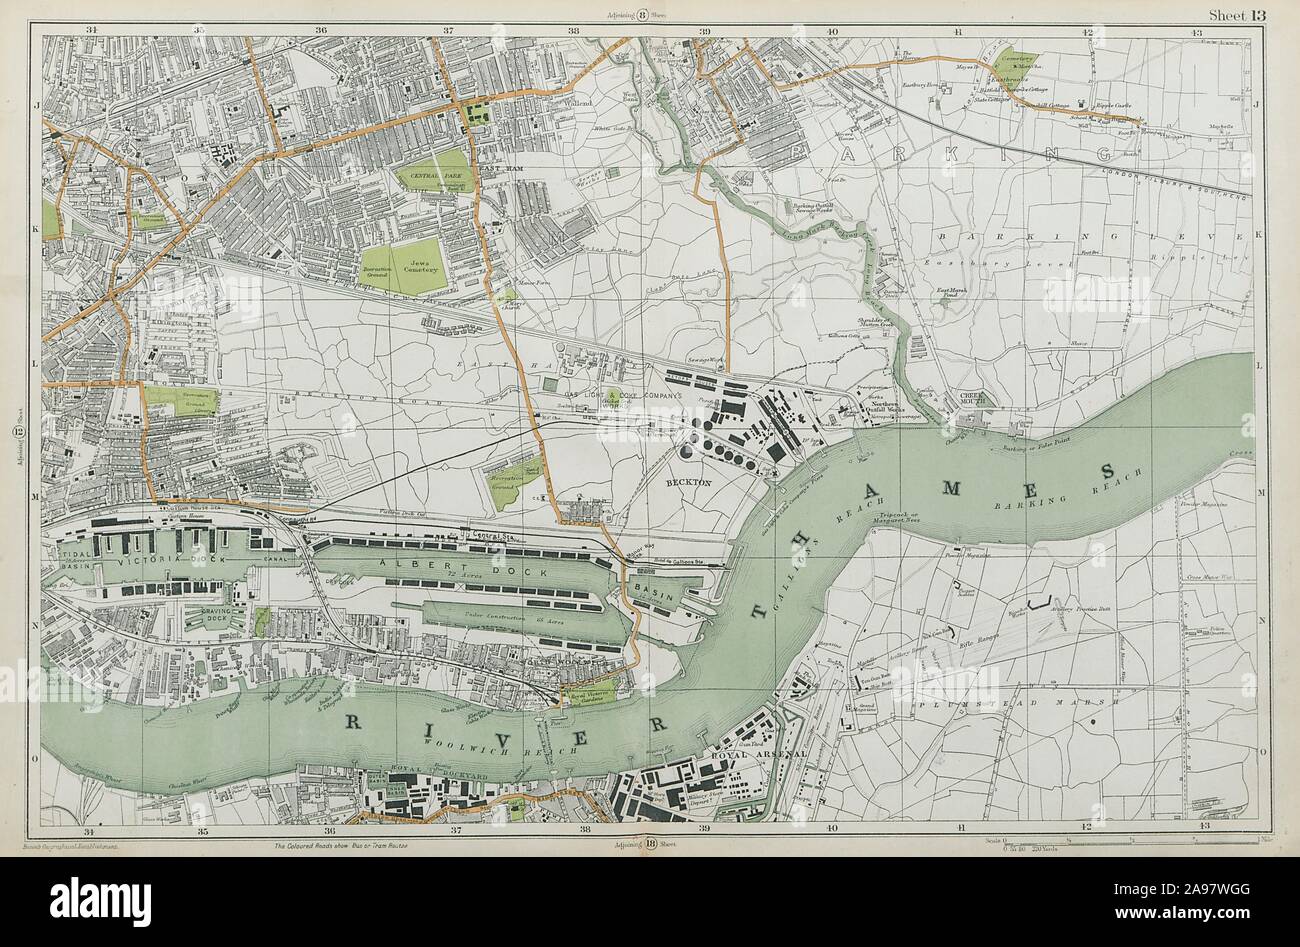 Ovest/Est prosciutto & BARKING Plaistow Woolwich Thamesmead Beckton. BACON 1920 mappa Foto Stock